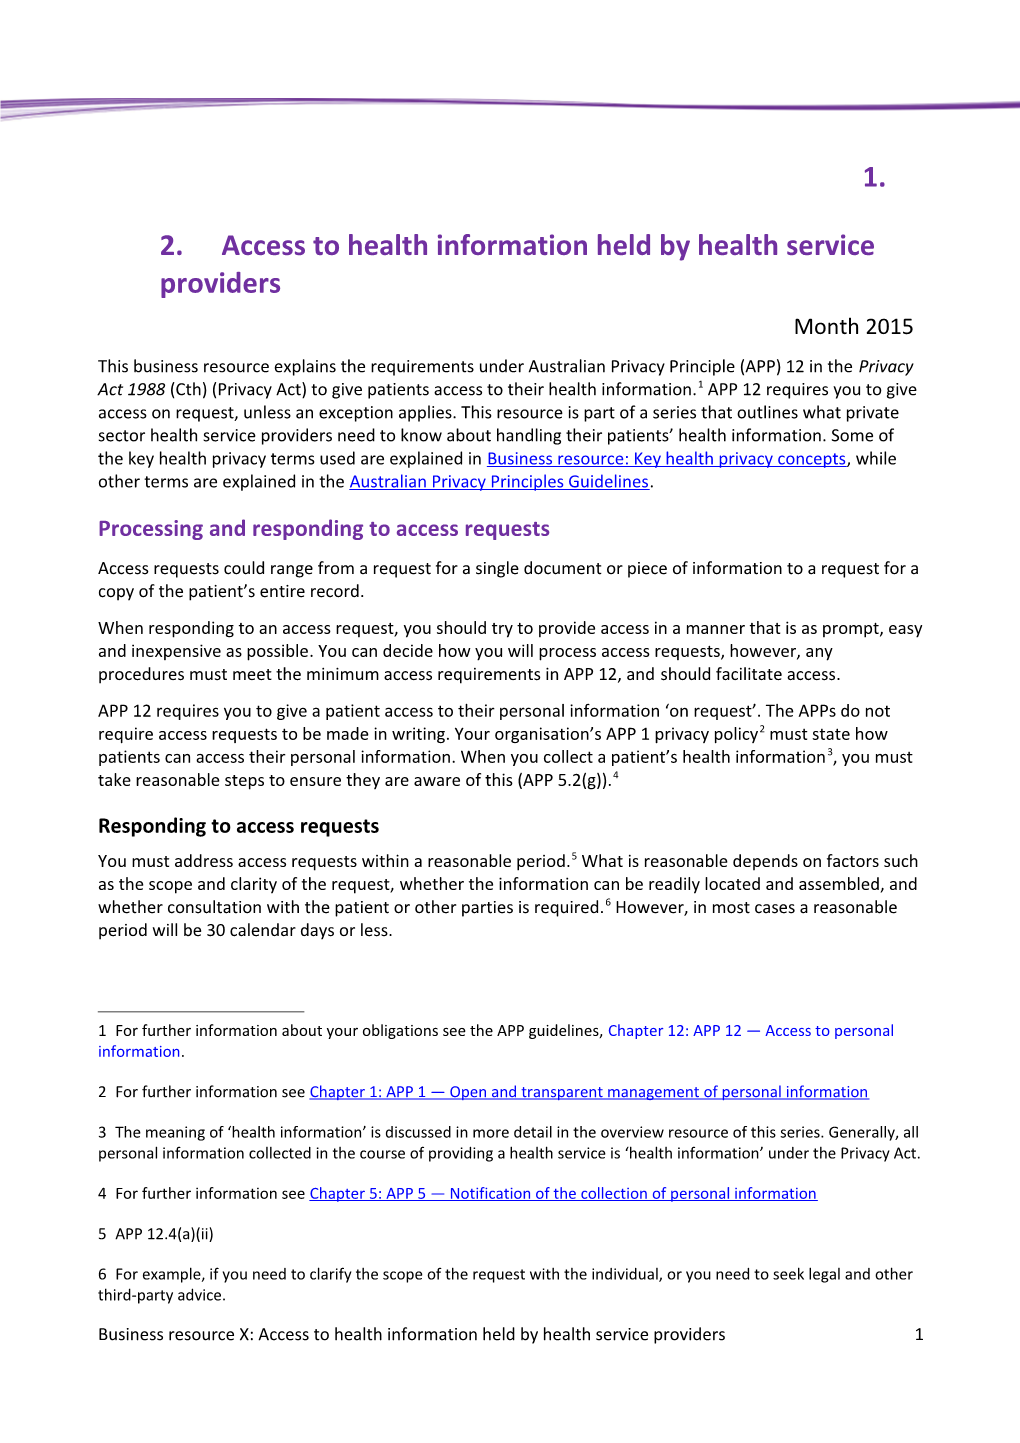 Access to Health Information Held by Health Service Providers